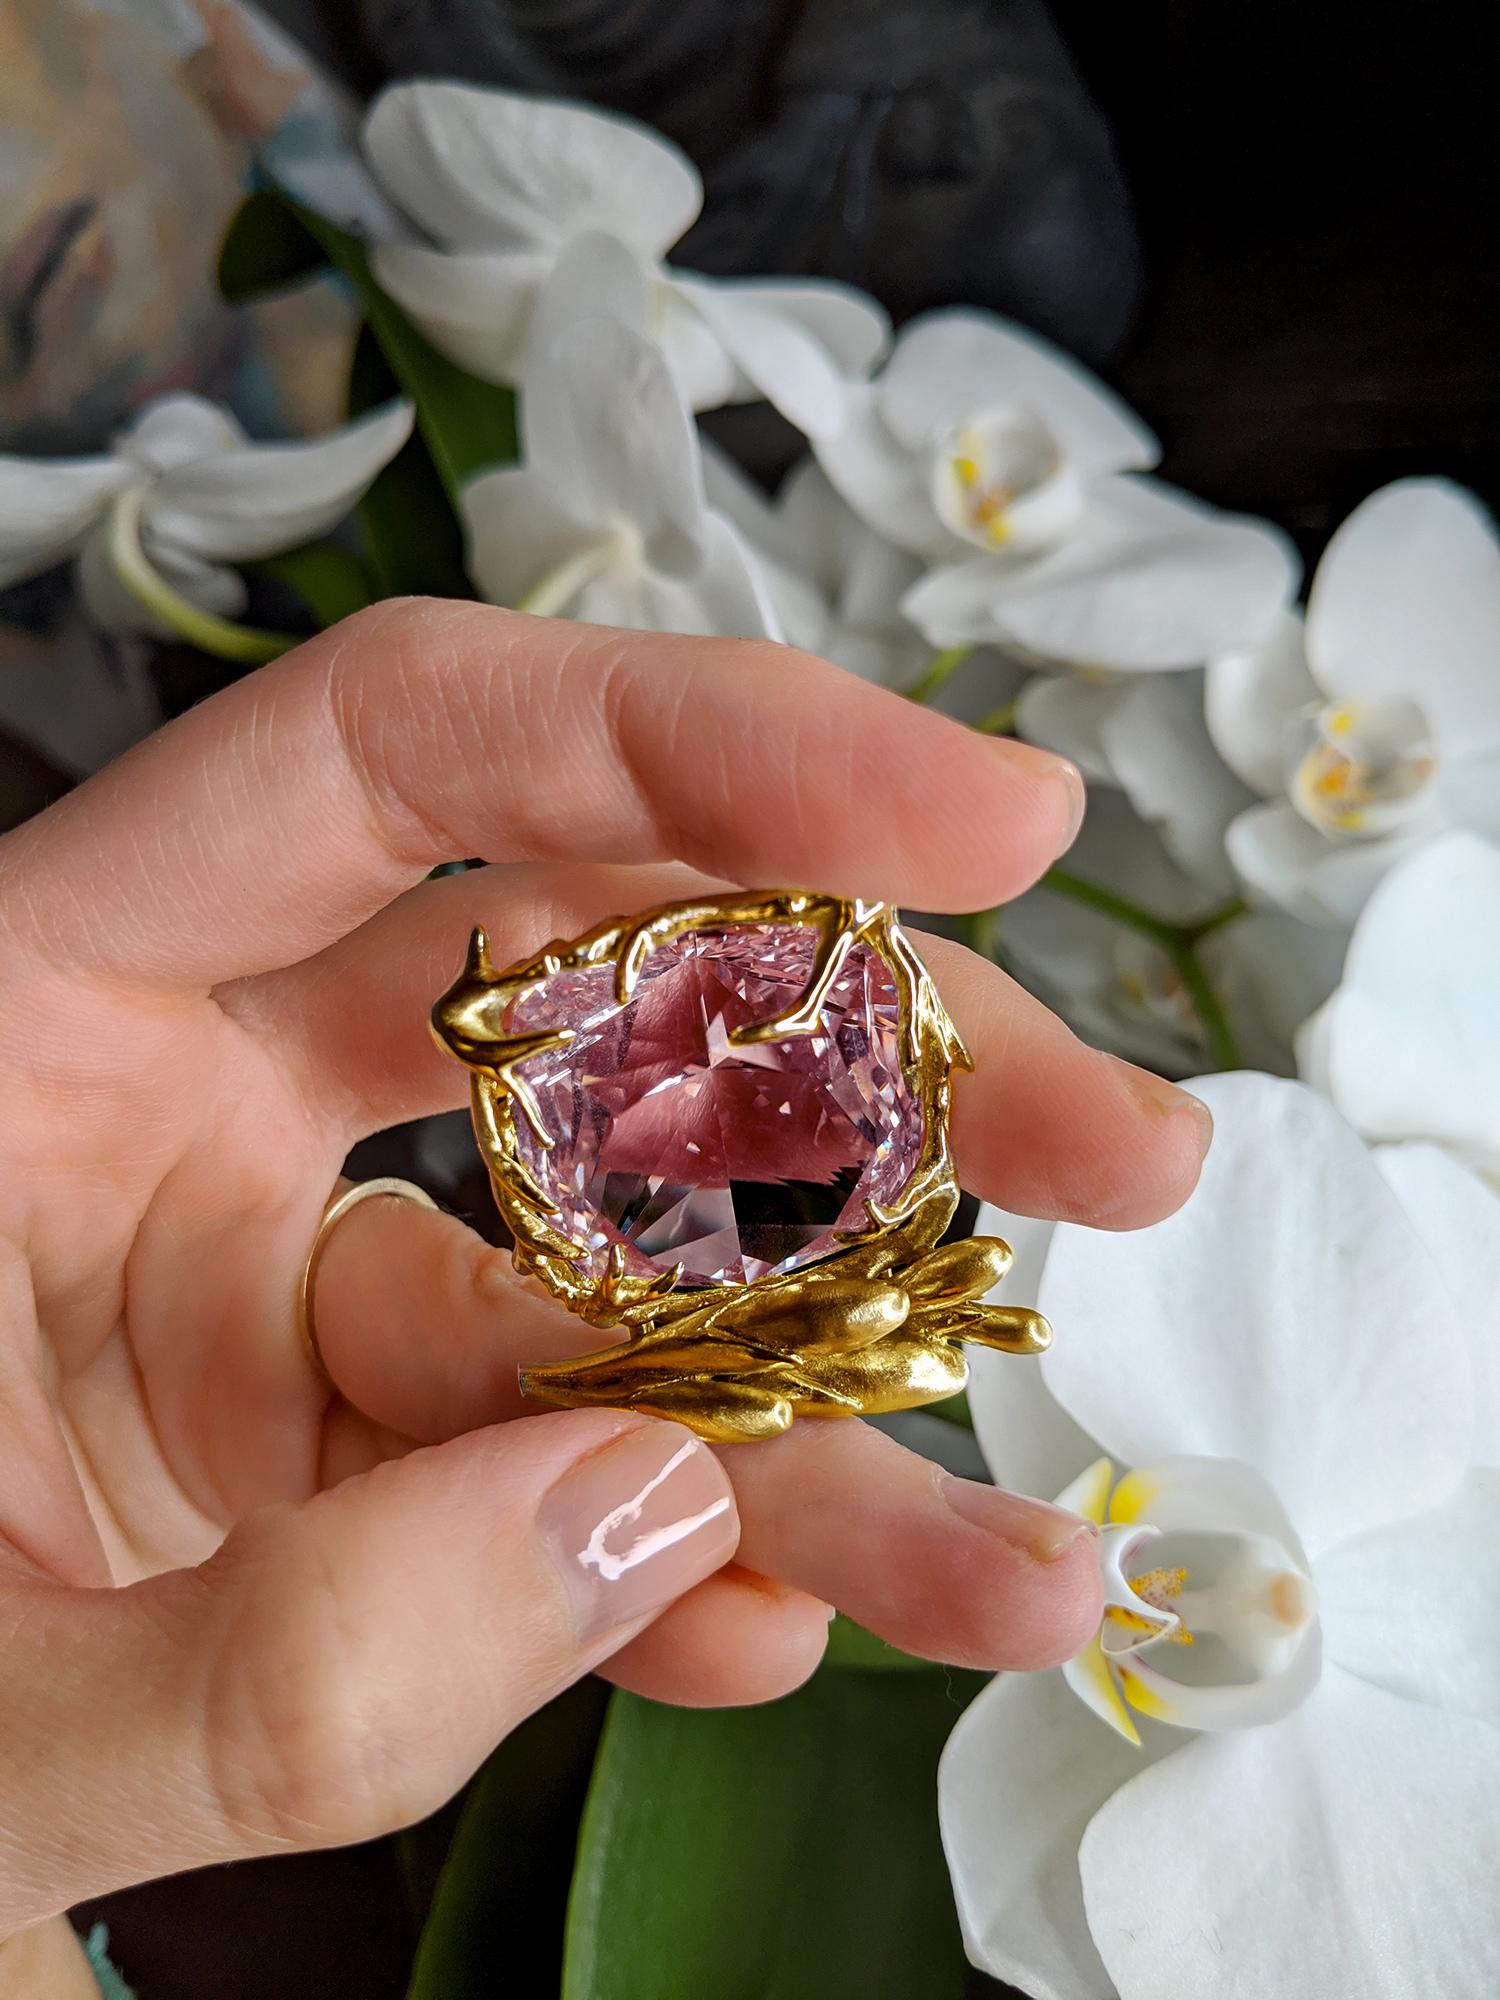 The Fairy Tale ring, featured in Vogue UA, is made of 14 karat yellow gold and features diamonds and a large pink kunzite. This jewelry is designed by the artist and oil painter, Polya Medvedeva, who has been creating outstanding jewelry designs for